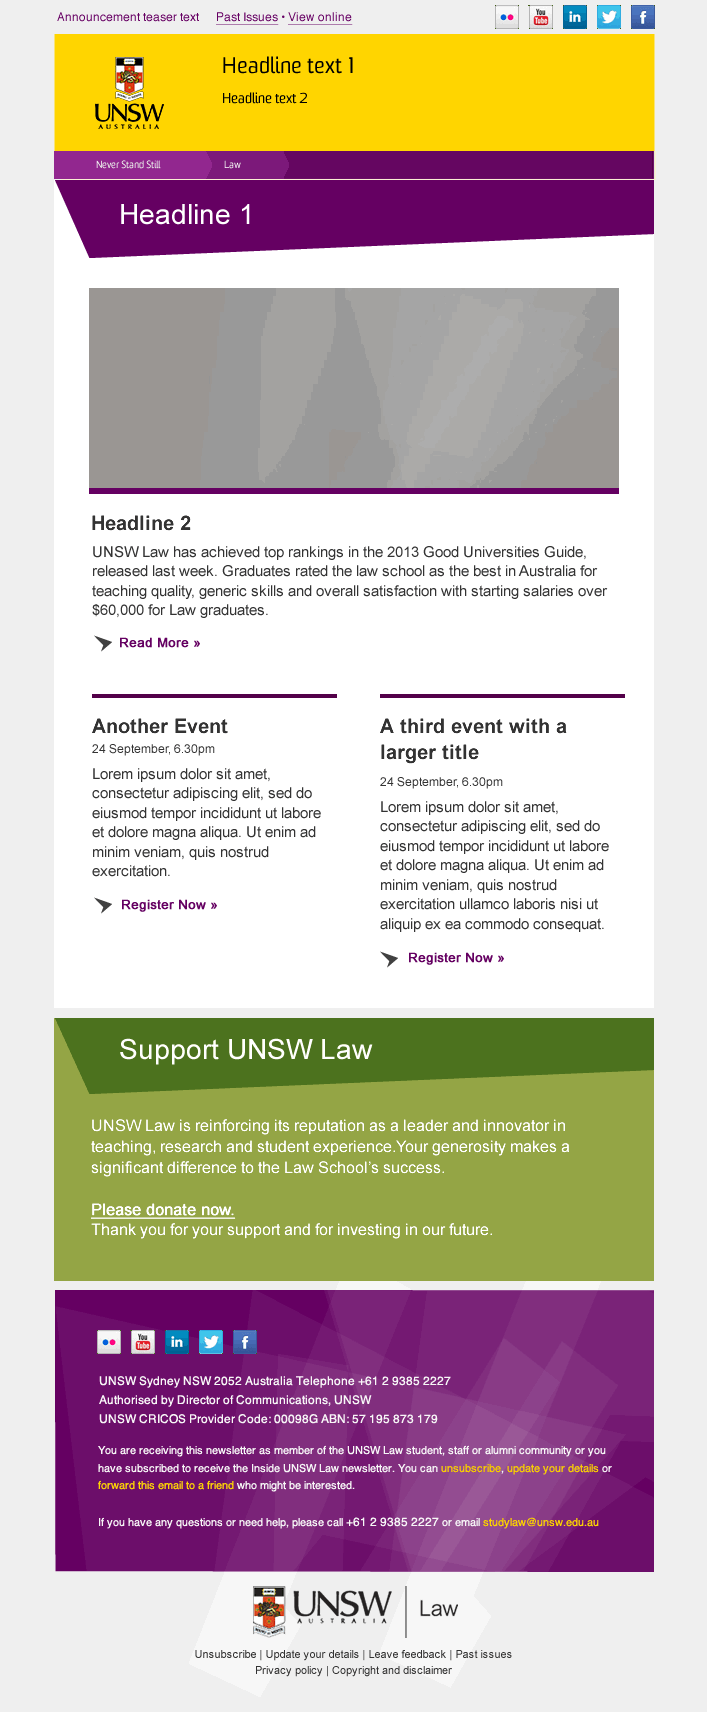 UNSW_Law_2015